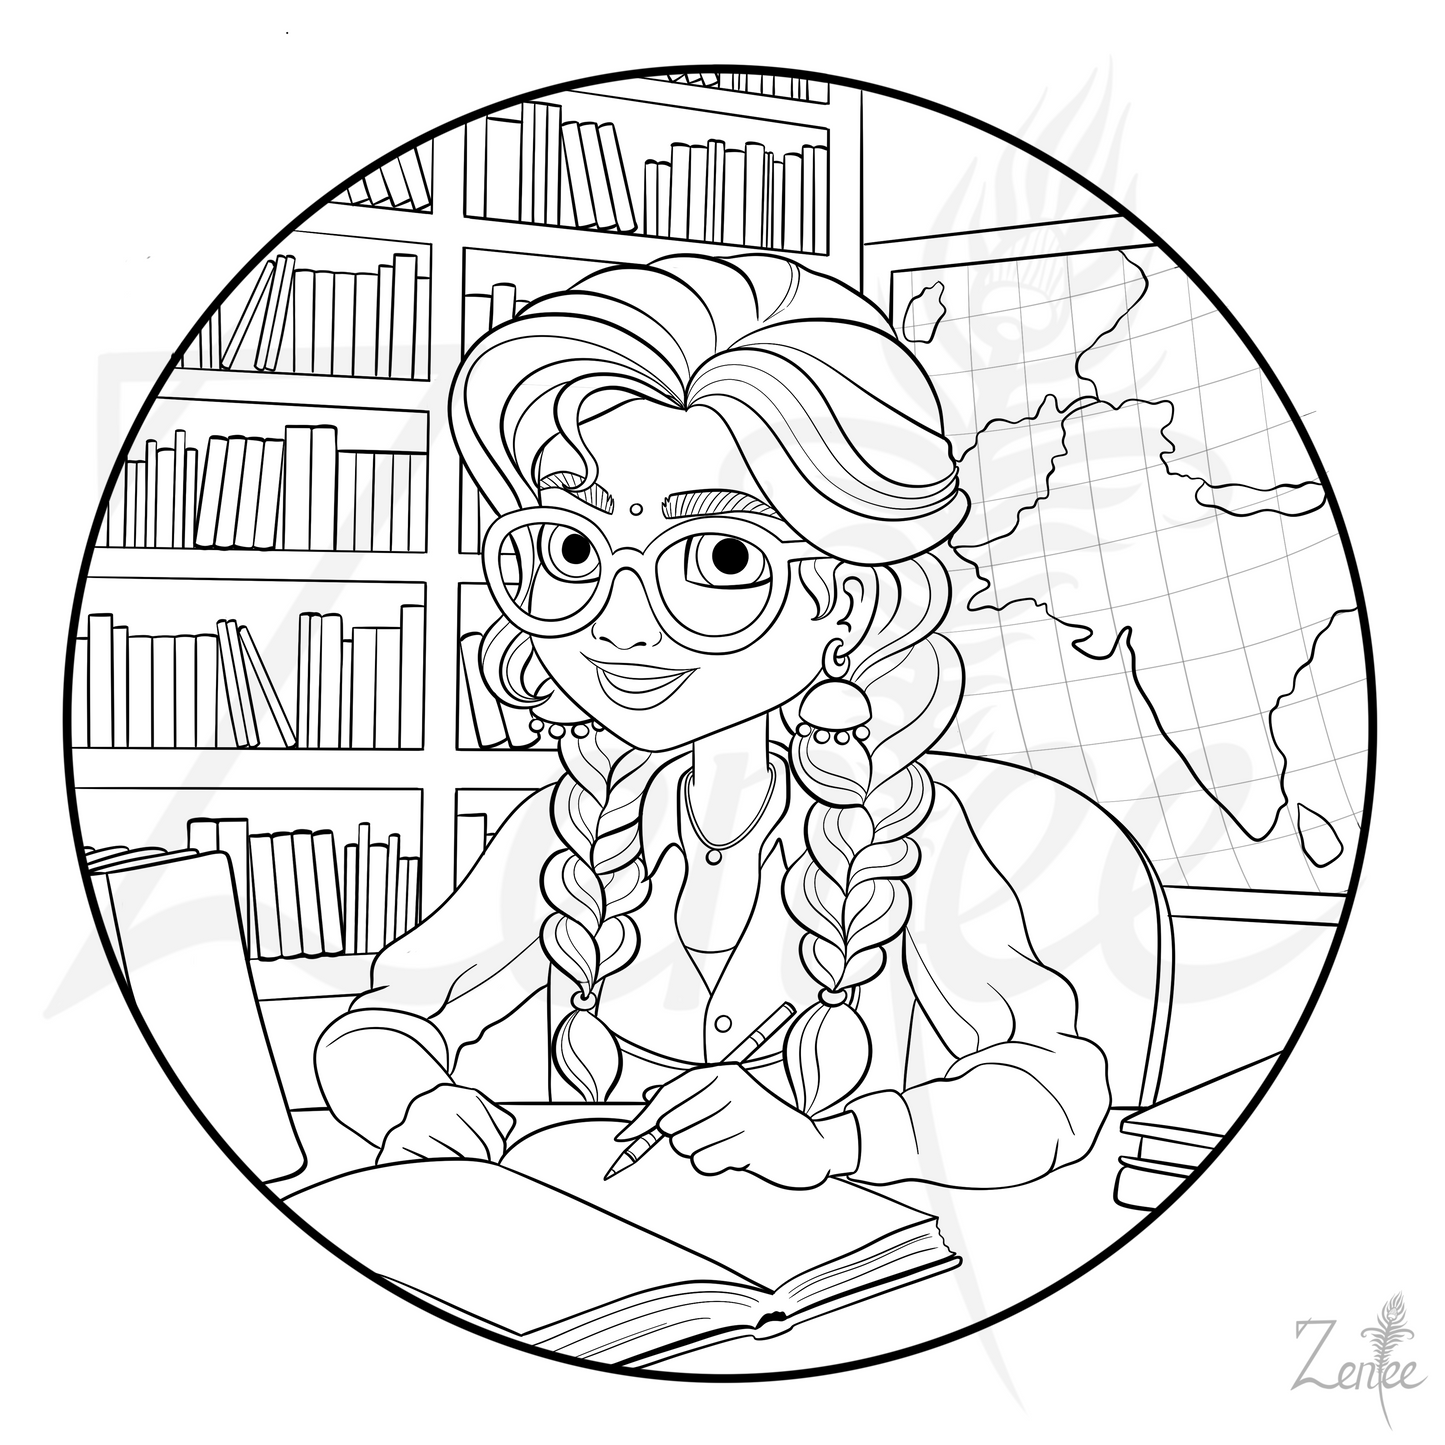 Alphabet Book: Hemal the Historian - Coloring Page